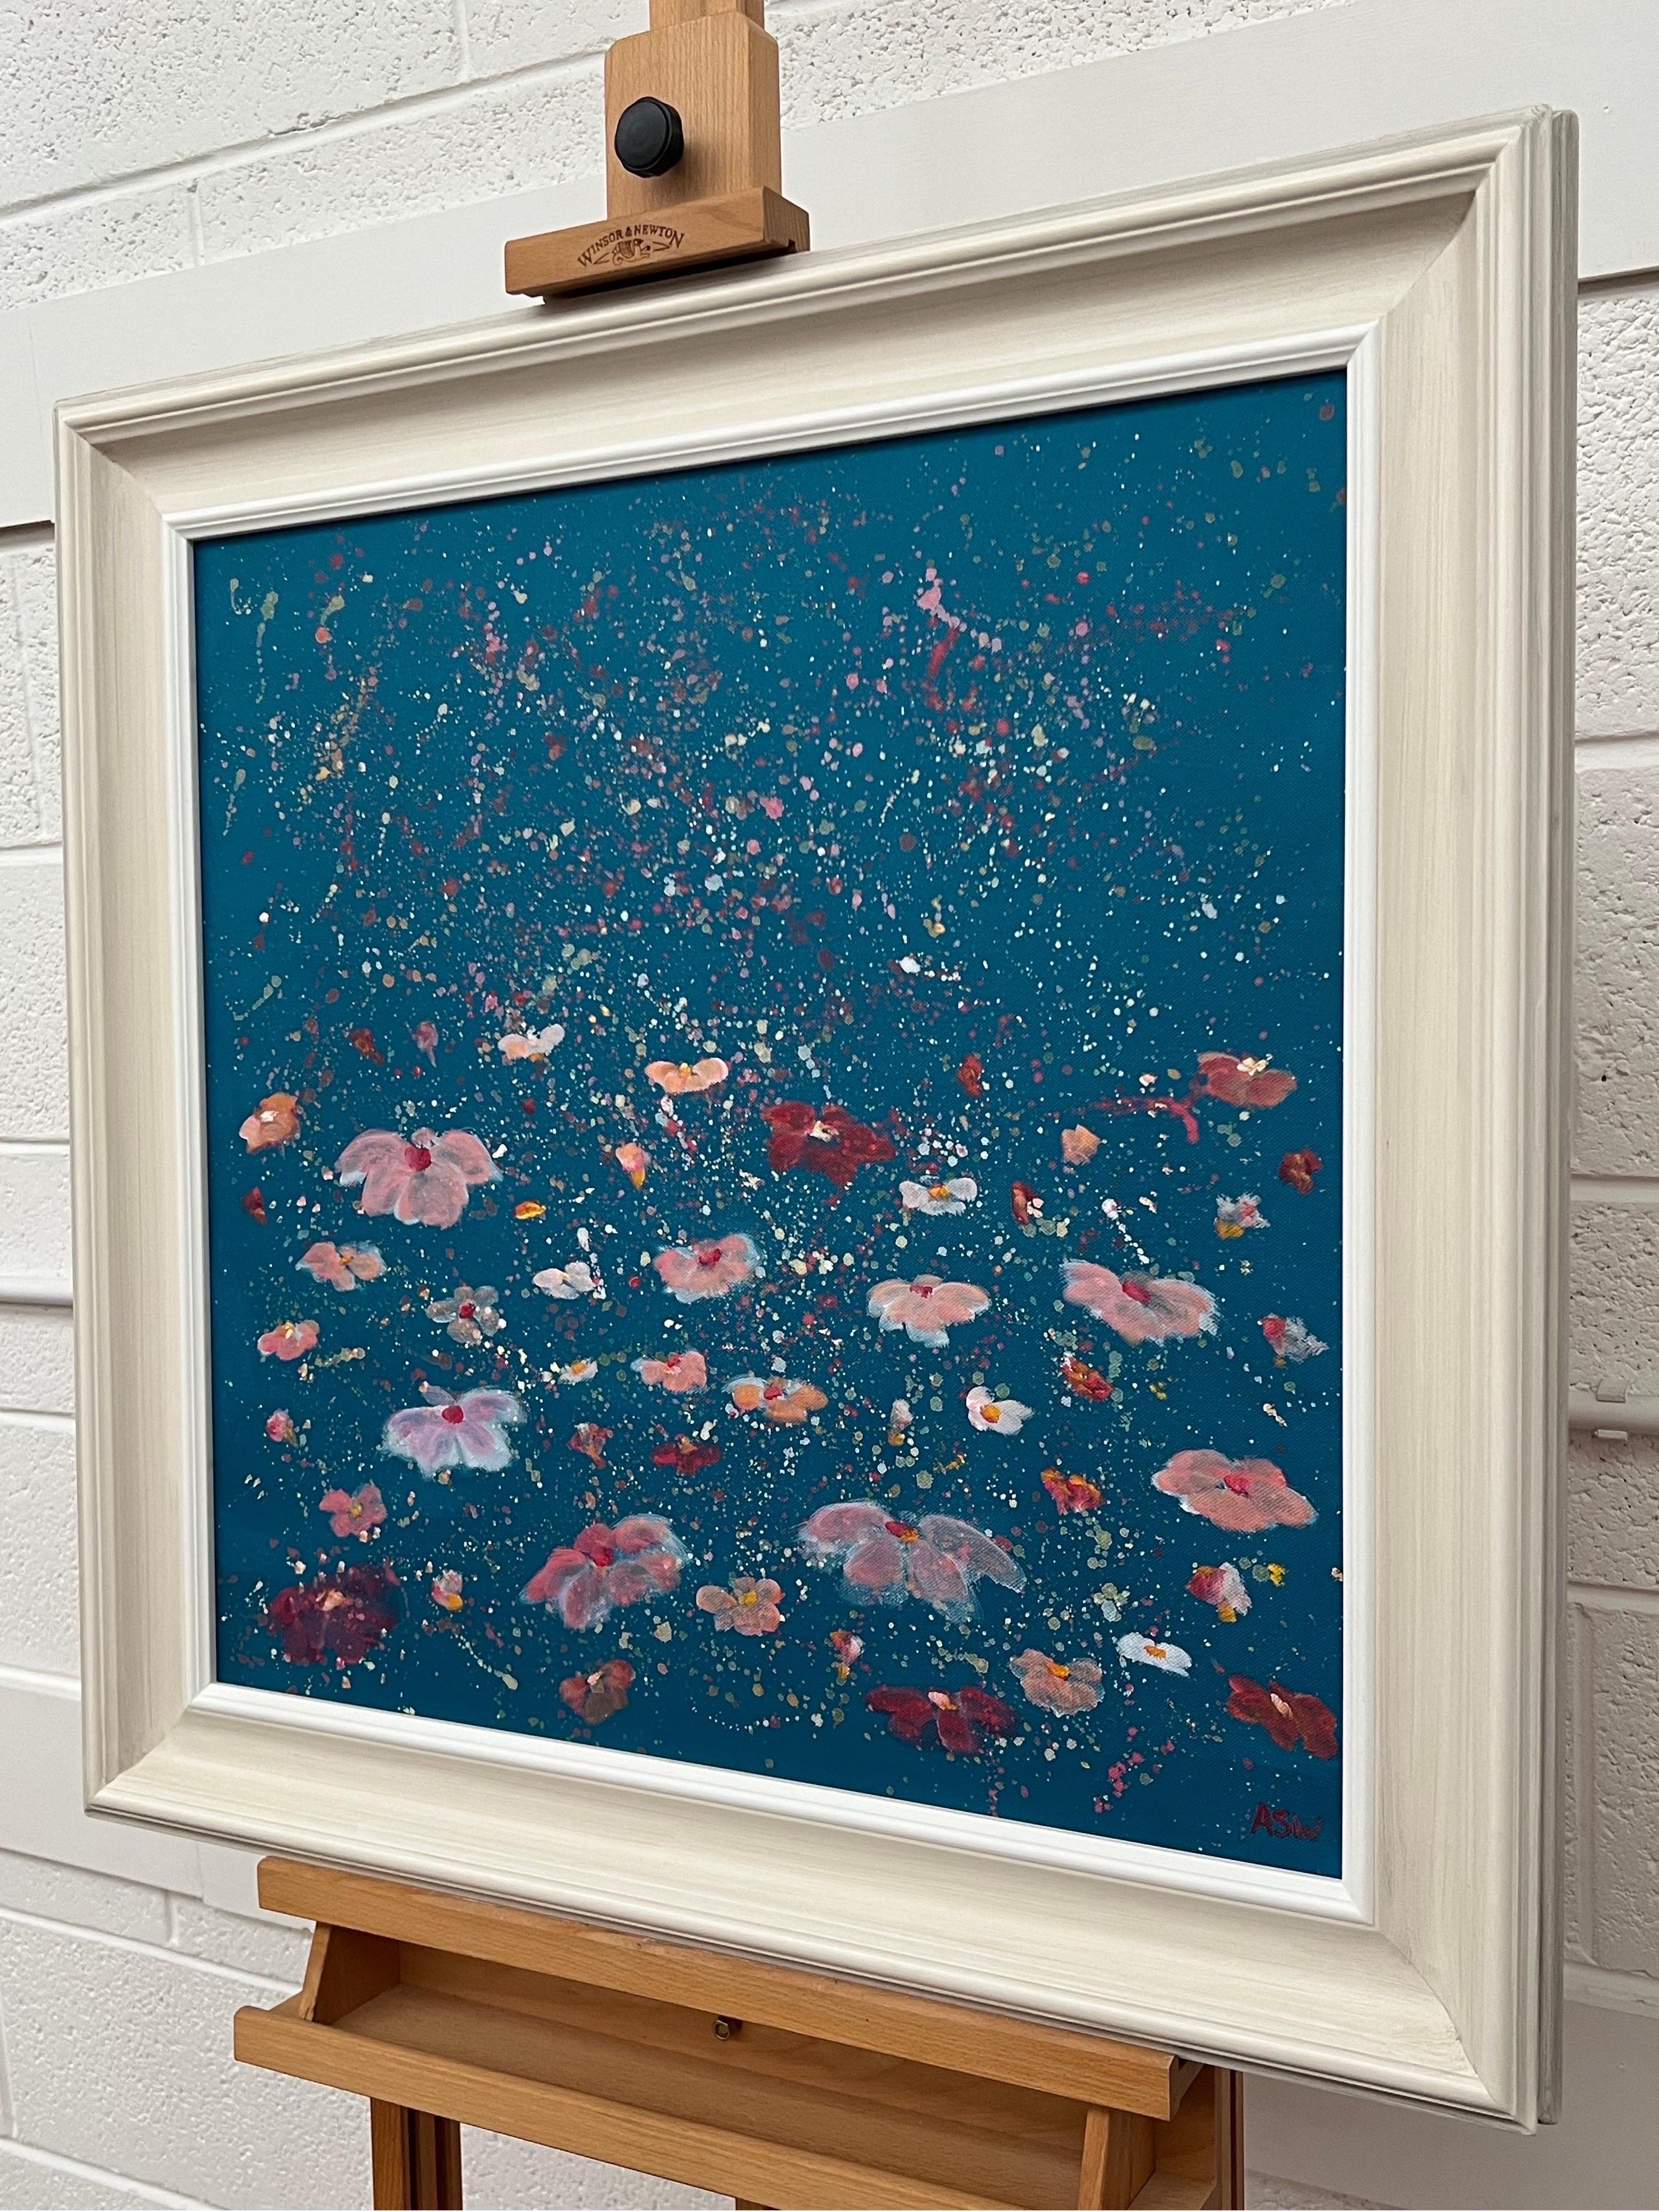 Abstract Landscape Art with Pink Flowers on a Deep Blue Turquoise Background by Contemporary British Artist, Angela Wakefield. This original is from the 'Spring Burst' Interior Design Series. Framed in the highest quality hand-finished contemporary